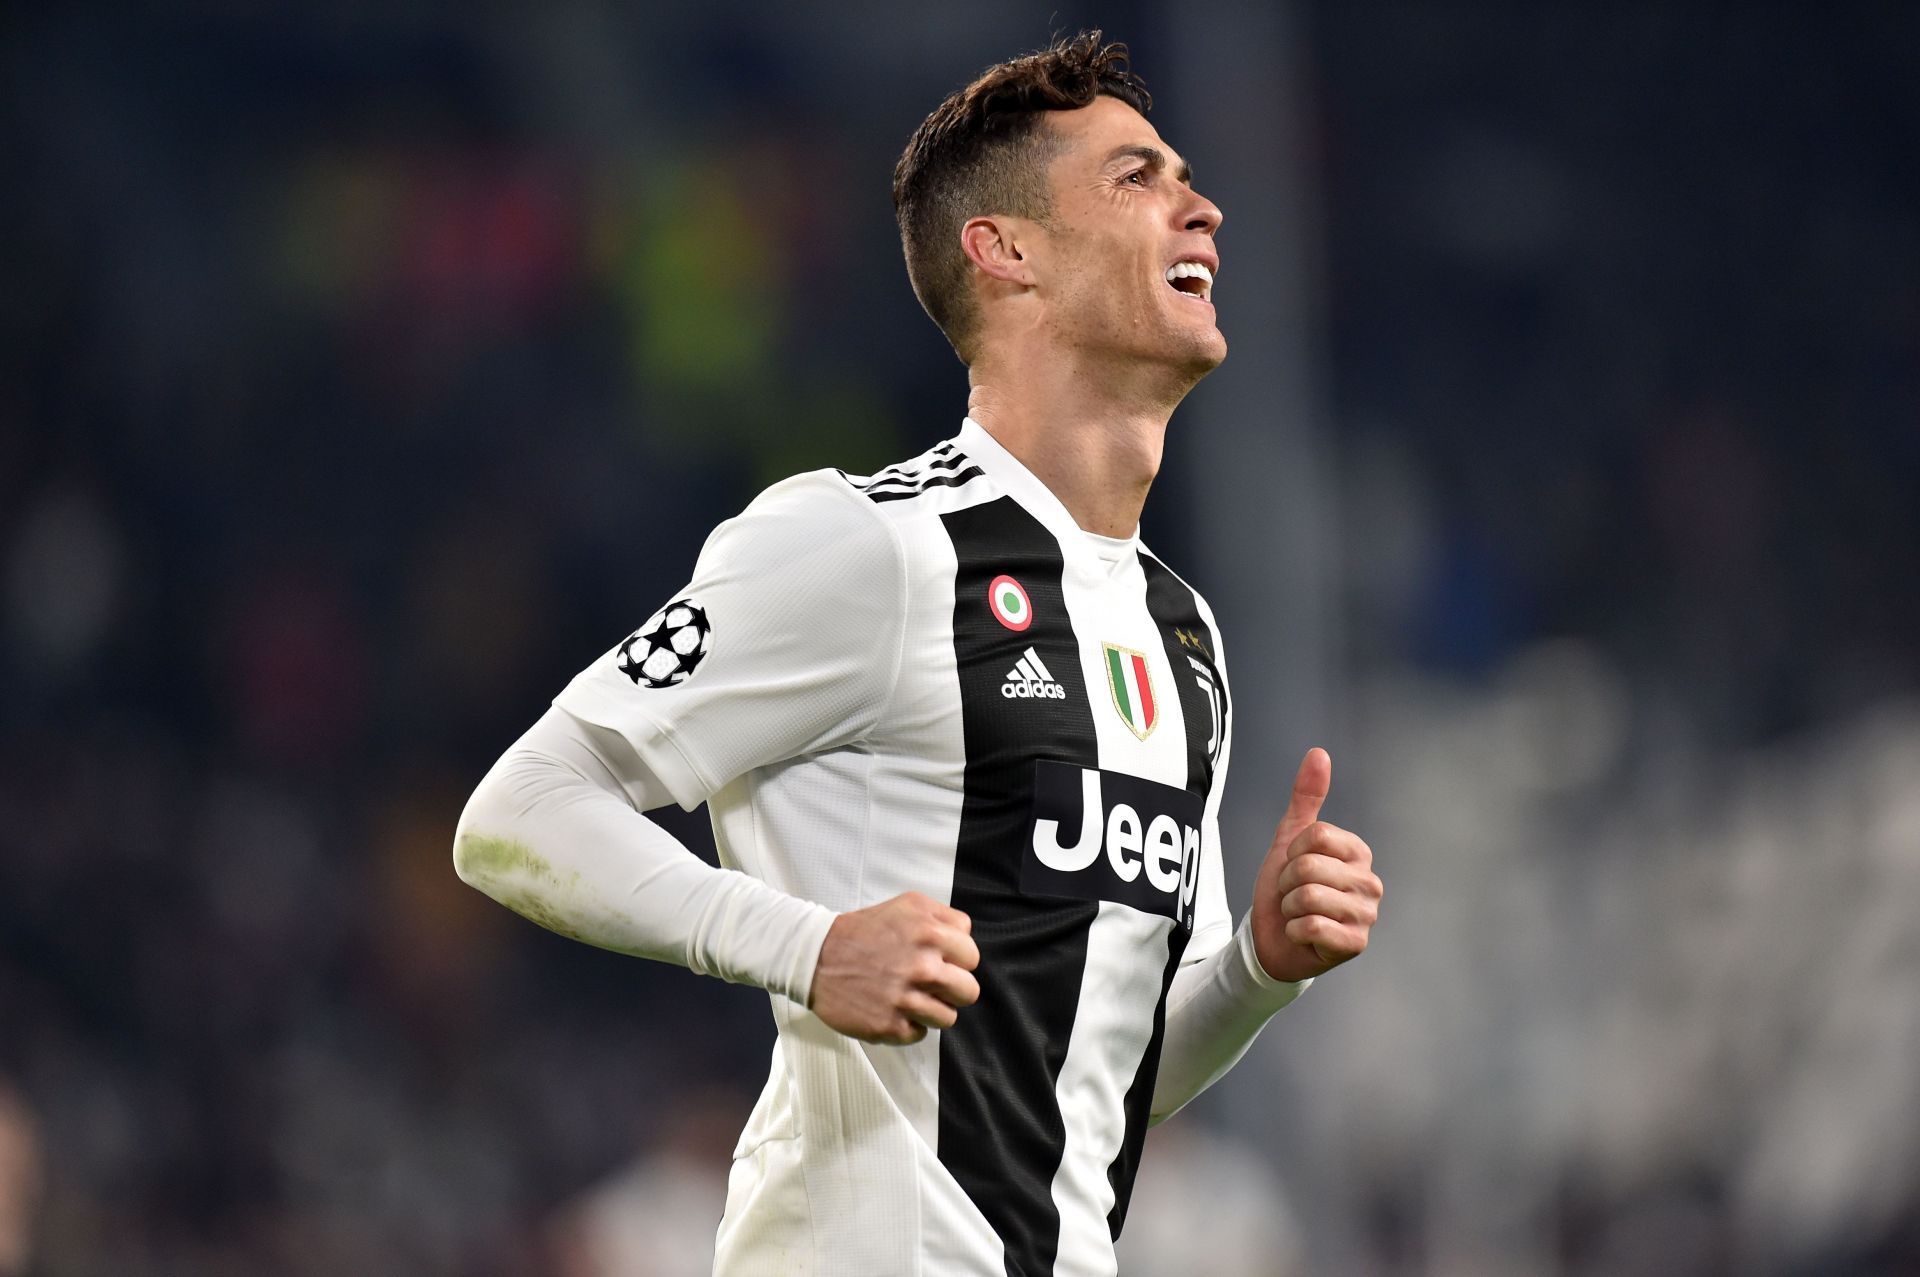 Ronaldo was at his supreme best against Atletico in the second leg